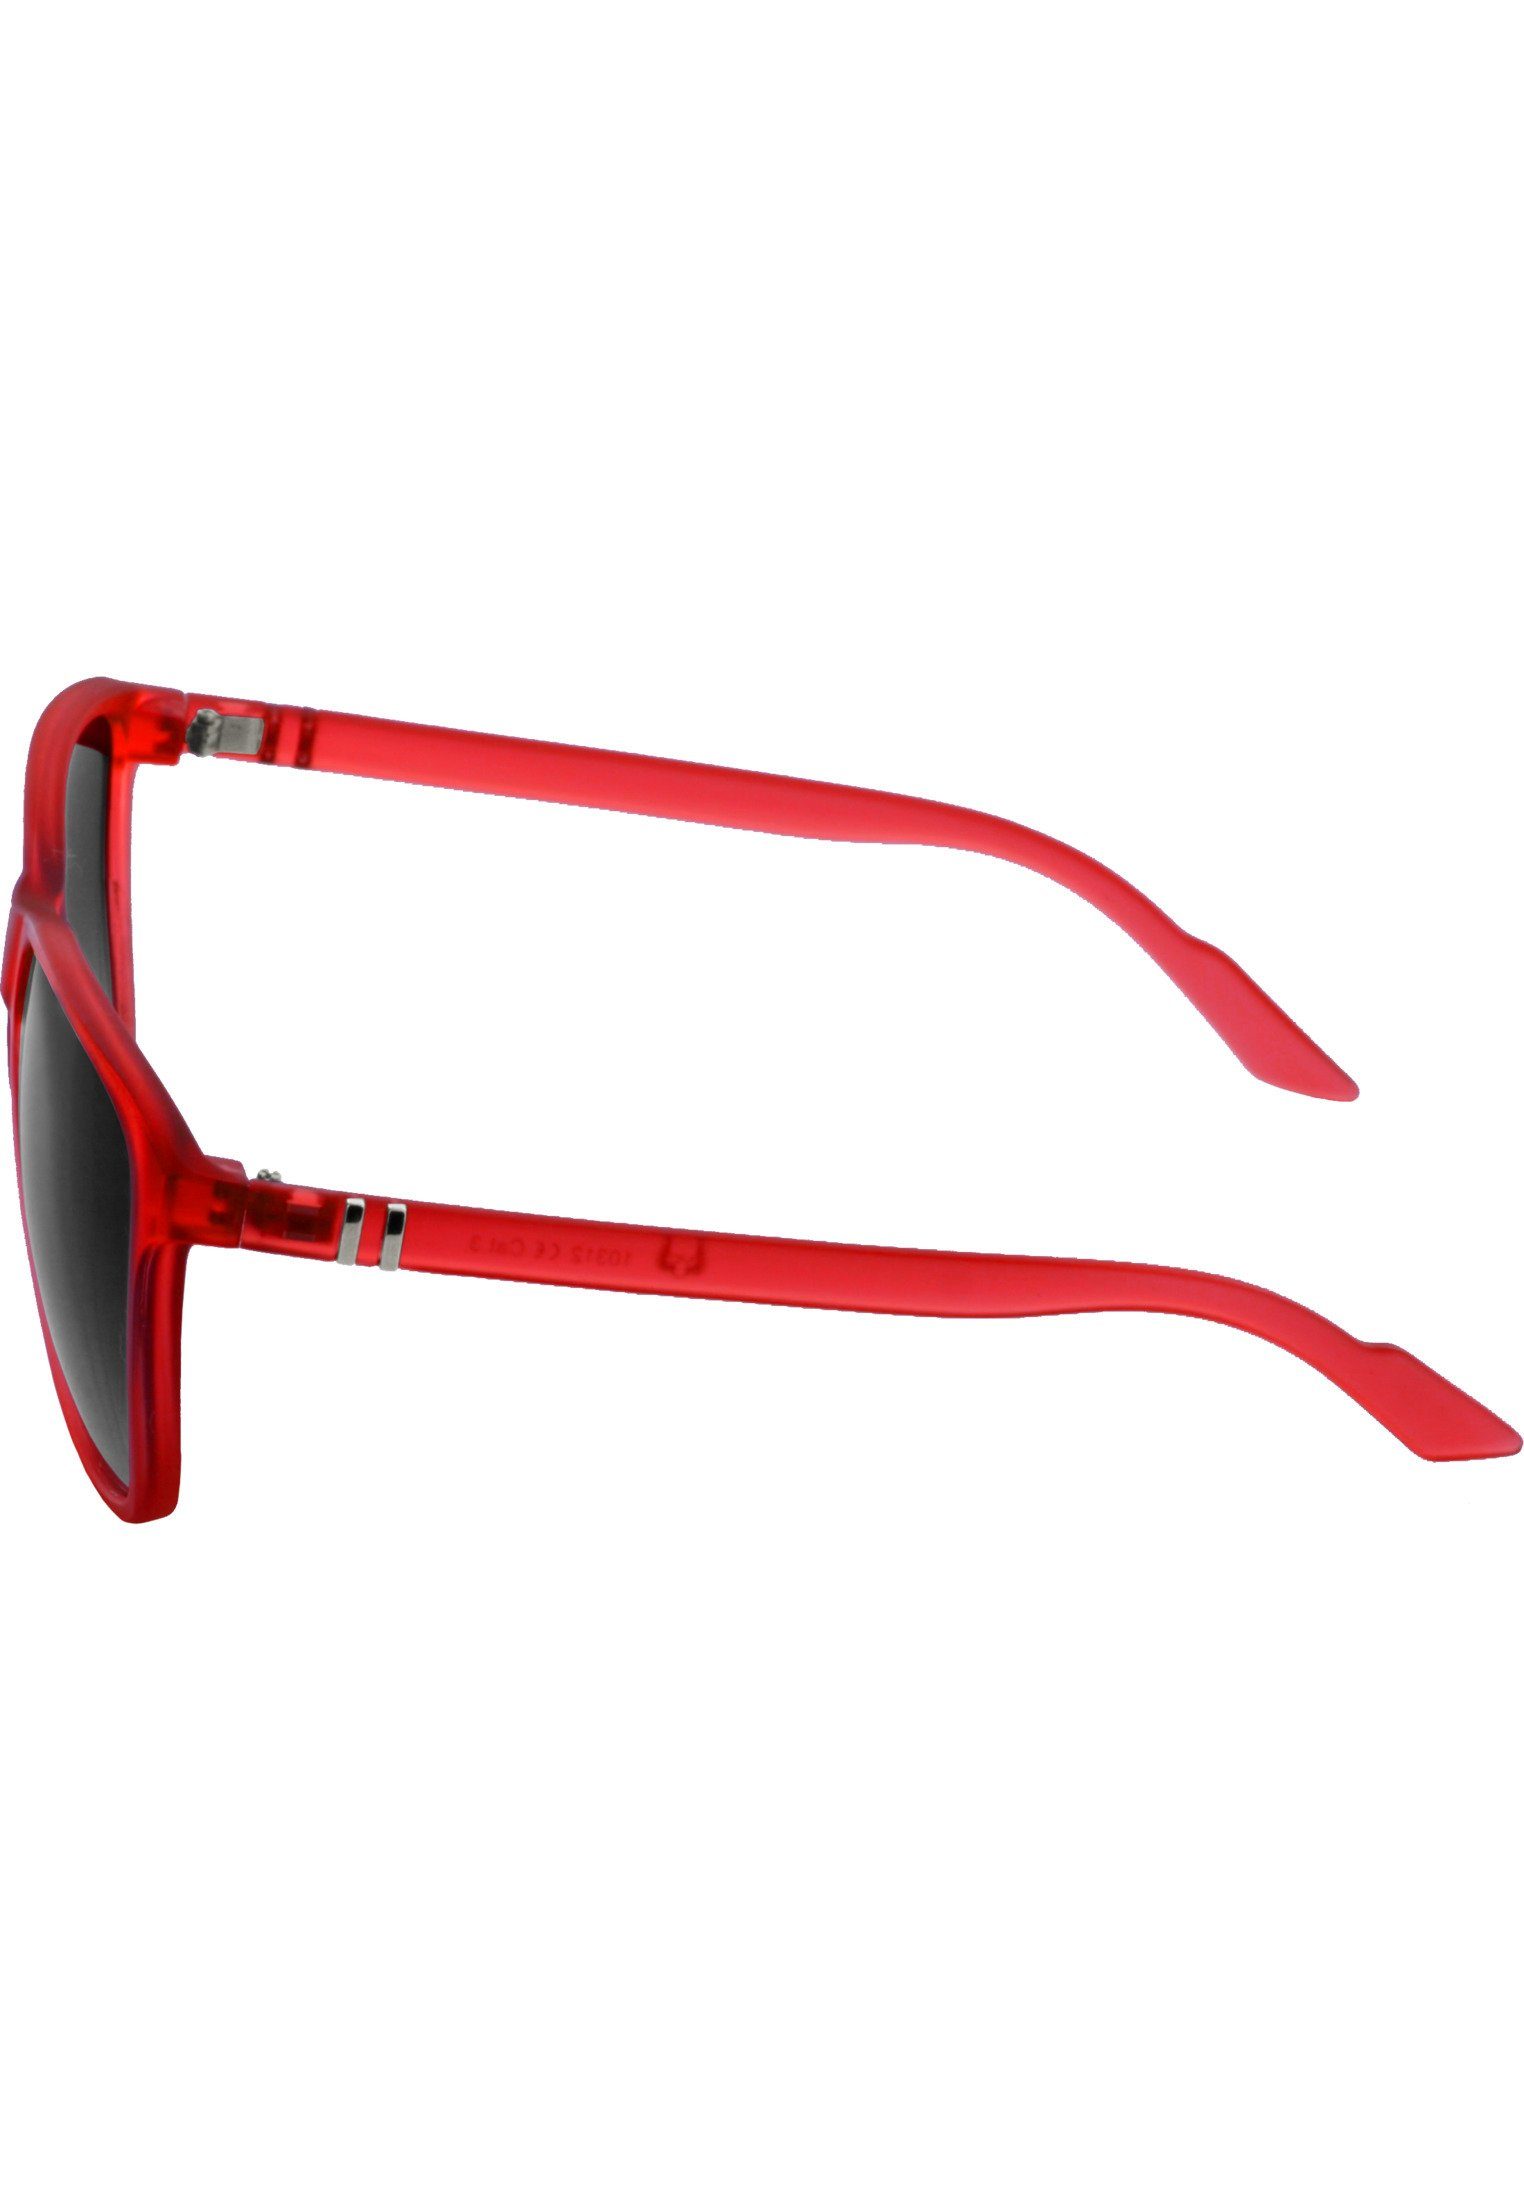 Sonnenbrille Sunglasses MSTRDS red Accessoires Chirwa